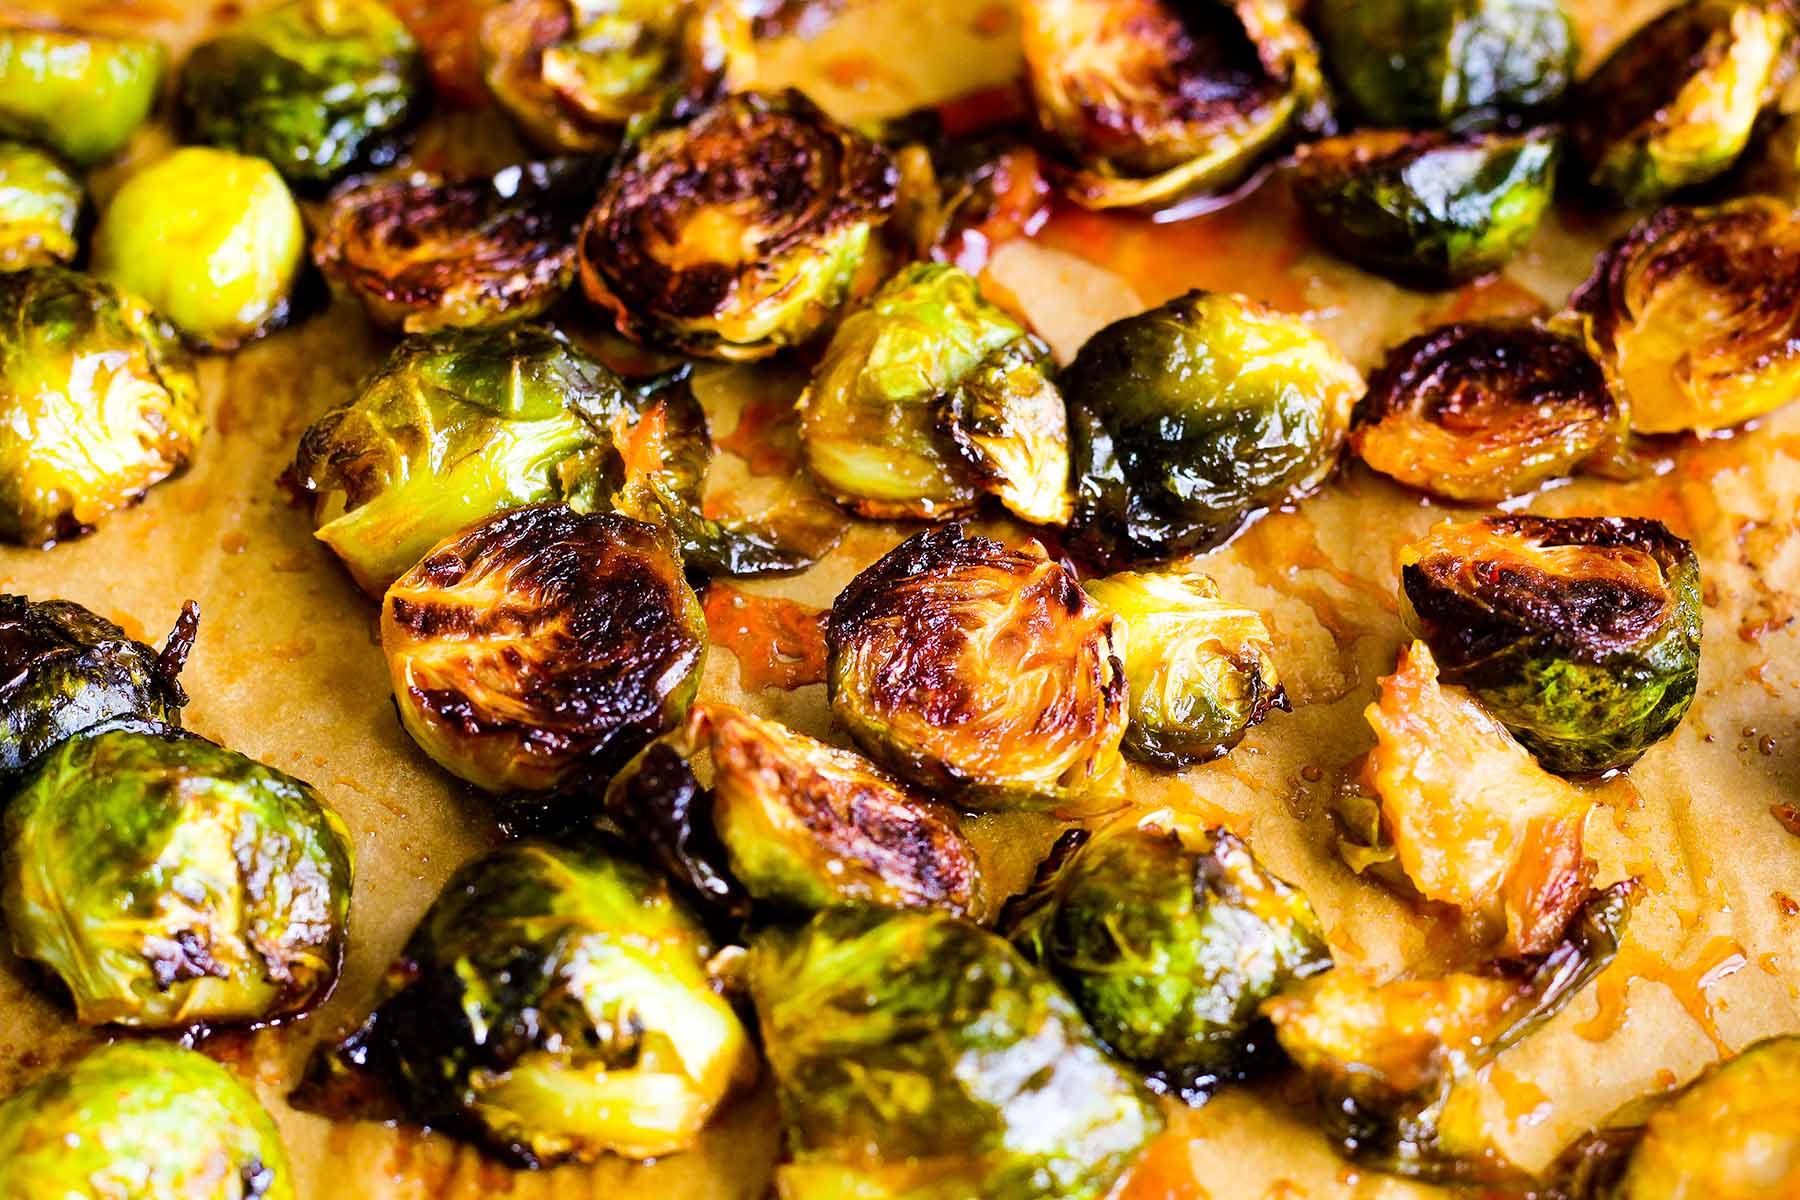 Roasted Brussels sprouts with honey sriracha sauce.